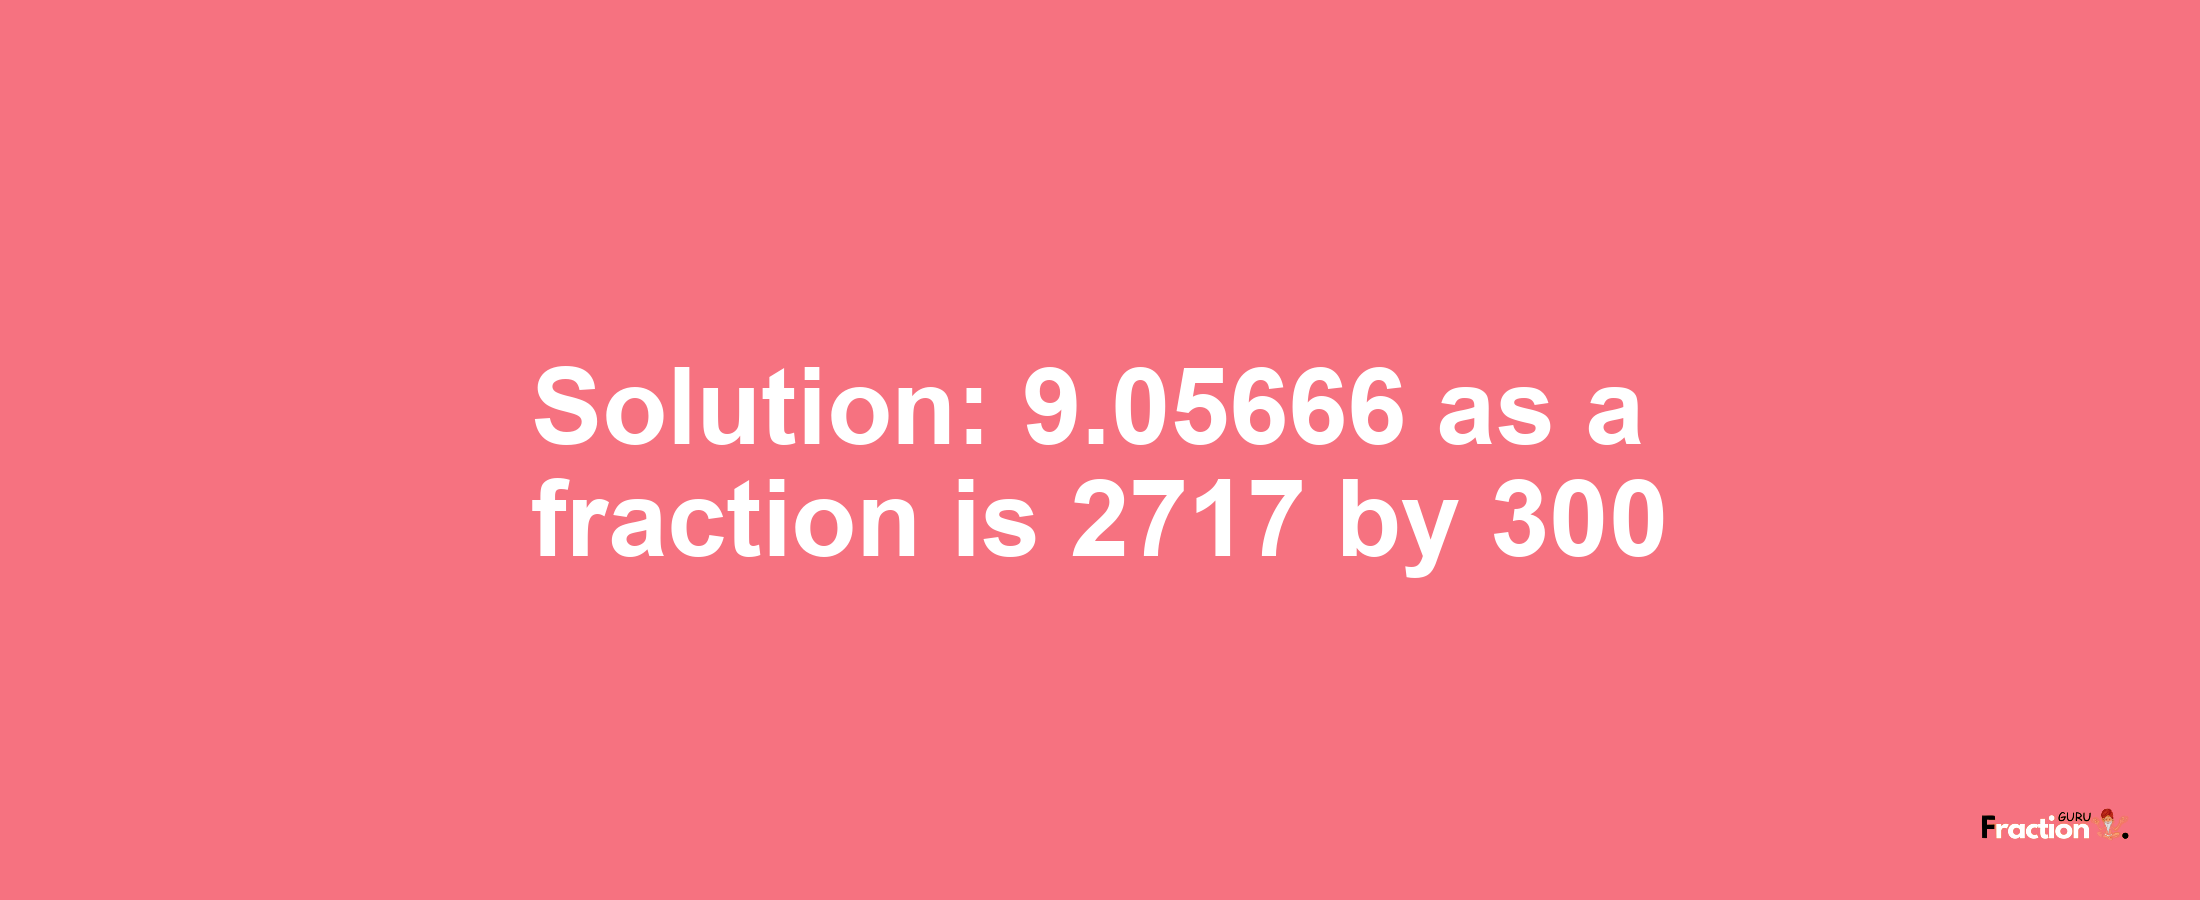 Solution:9.05666 as a fraction is 2717/300